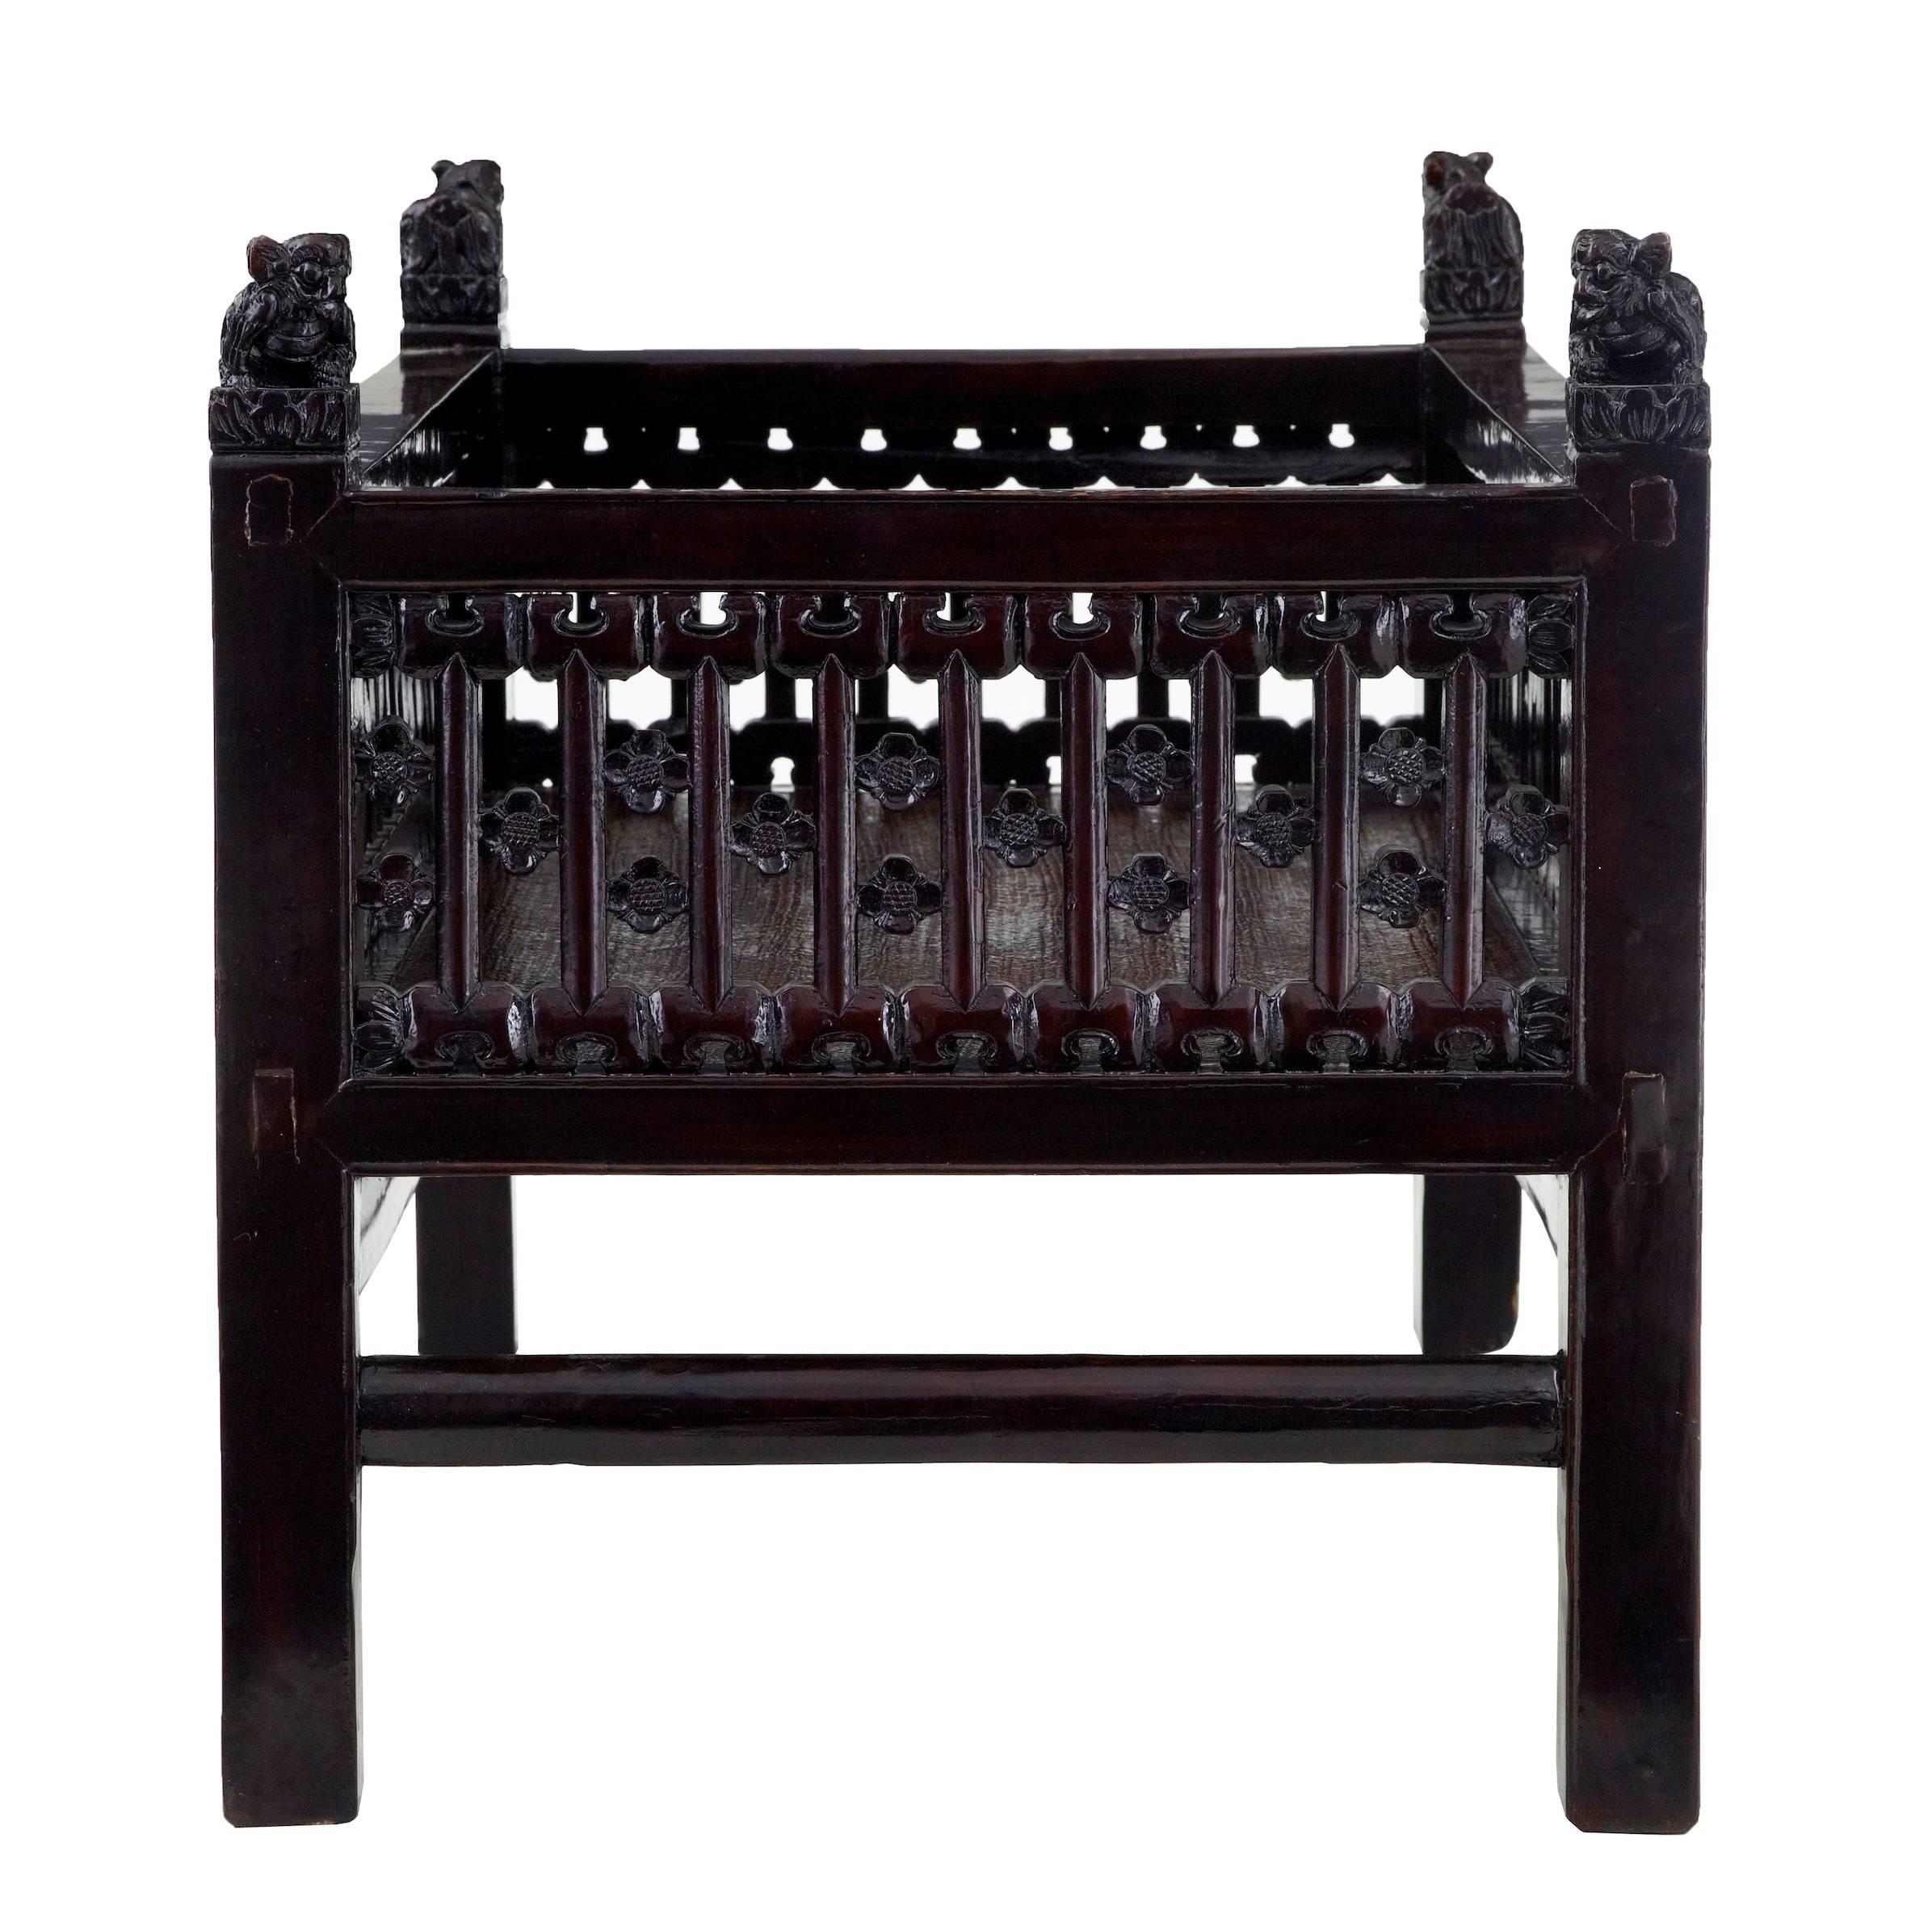 Chinese export carved jardinière, circa 1890.
With carved dogs of foe on each corner.
Rattan base which we believe lends itself to a planter but could be a small bed.
Measures:
Height: 22 1/2